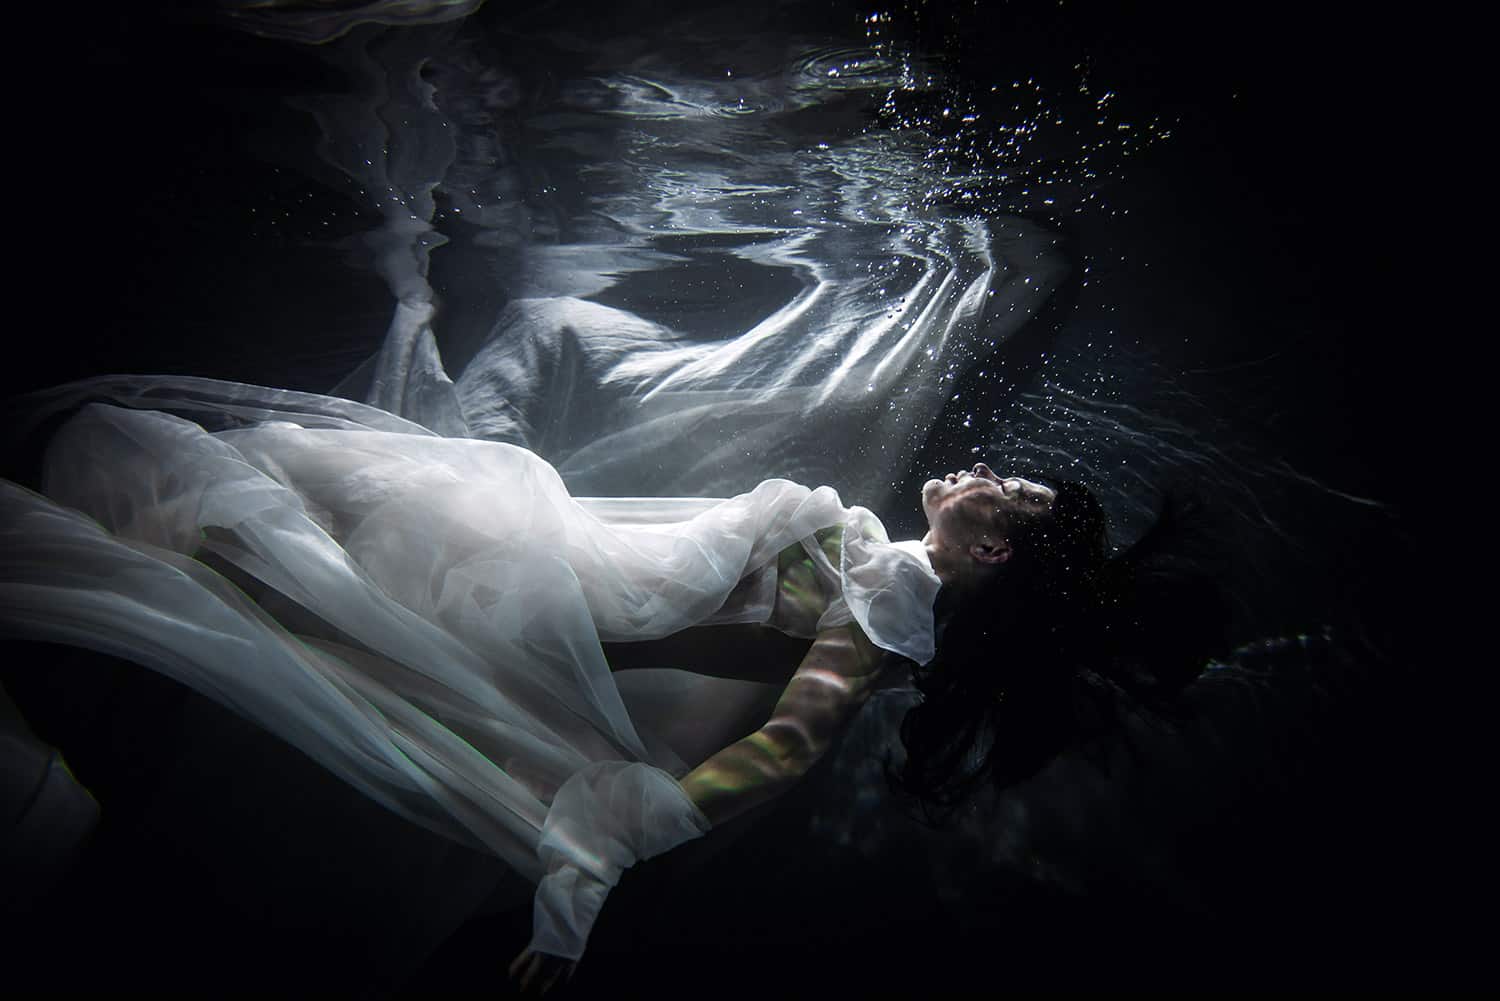 Mysterious woman in white floating underwater